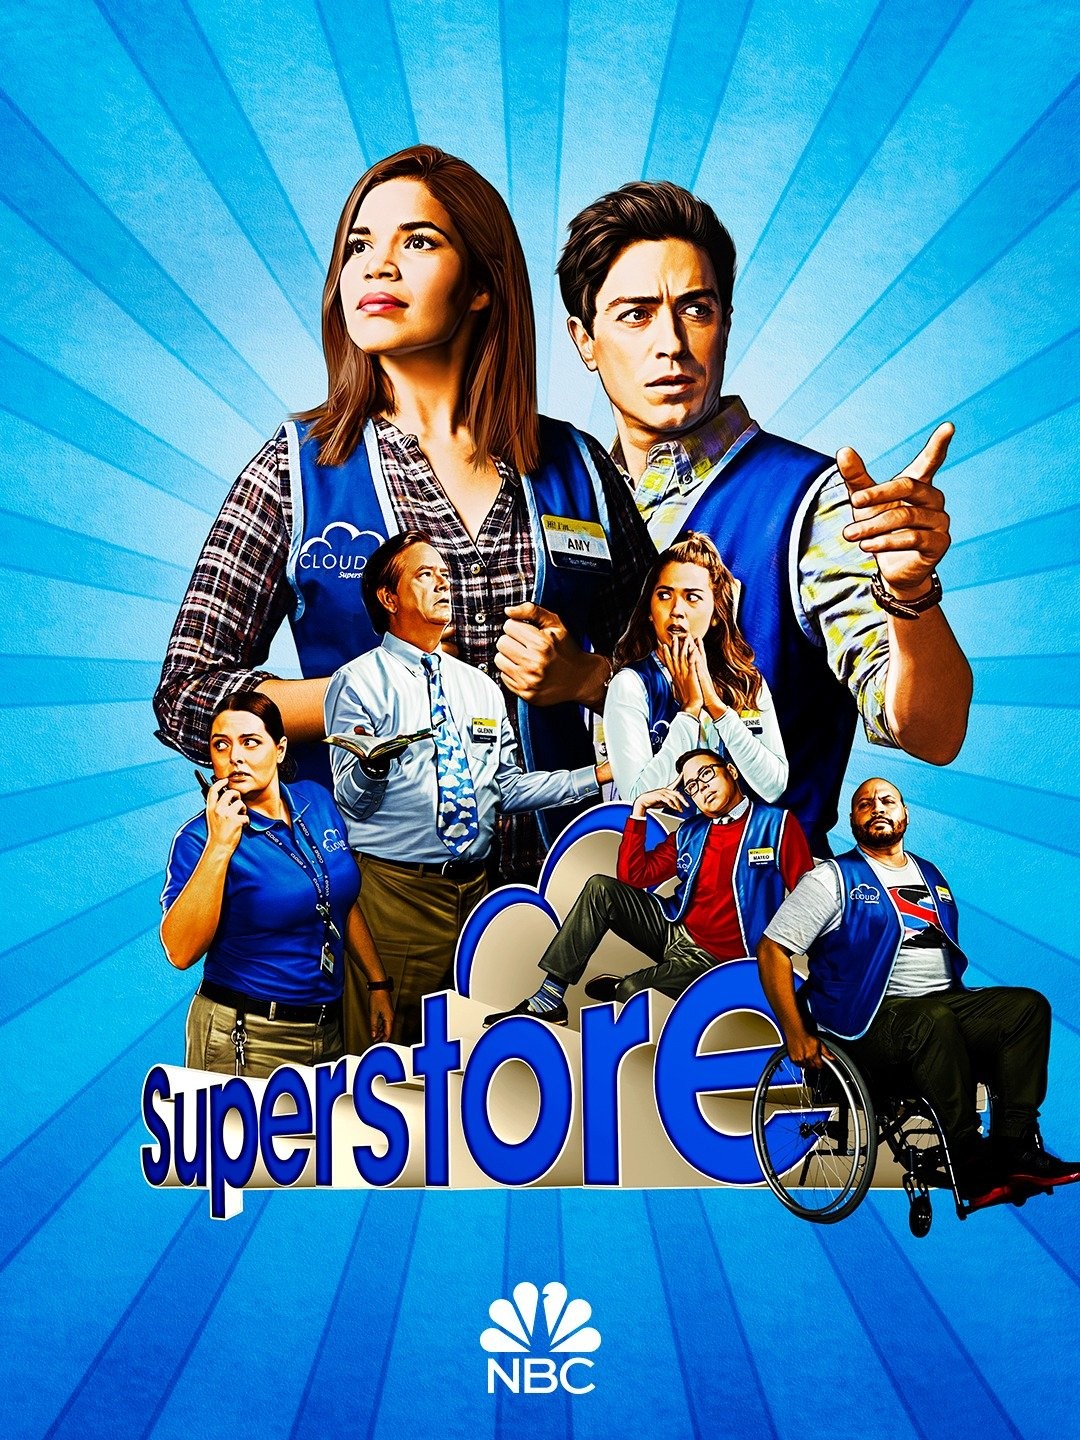 Superstore - Rotten Tomatoes